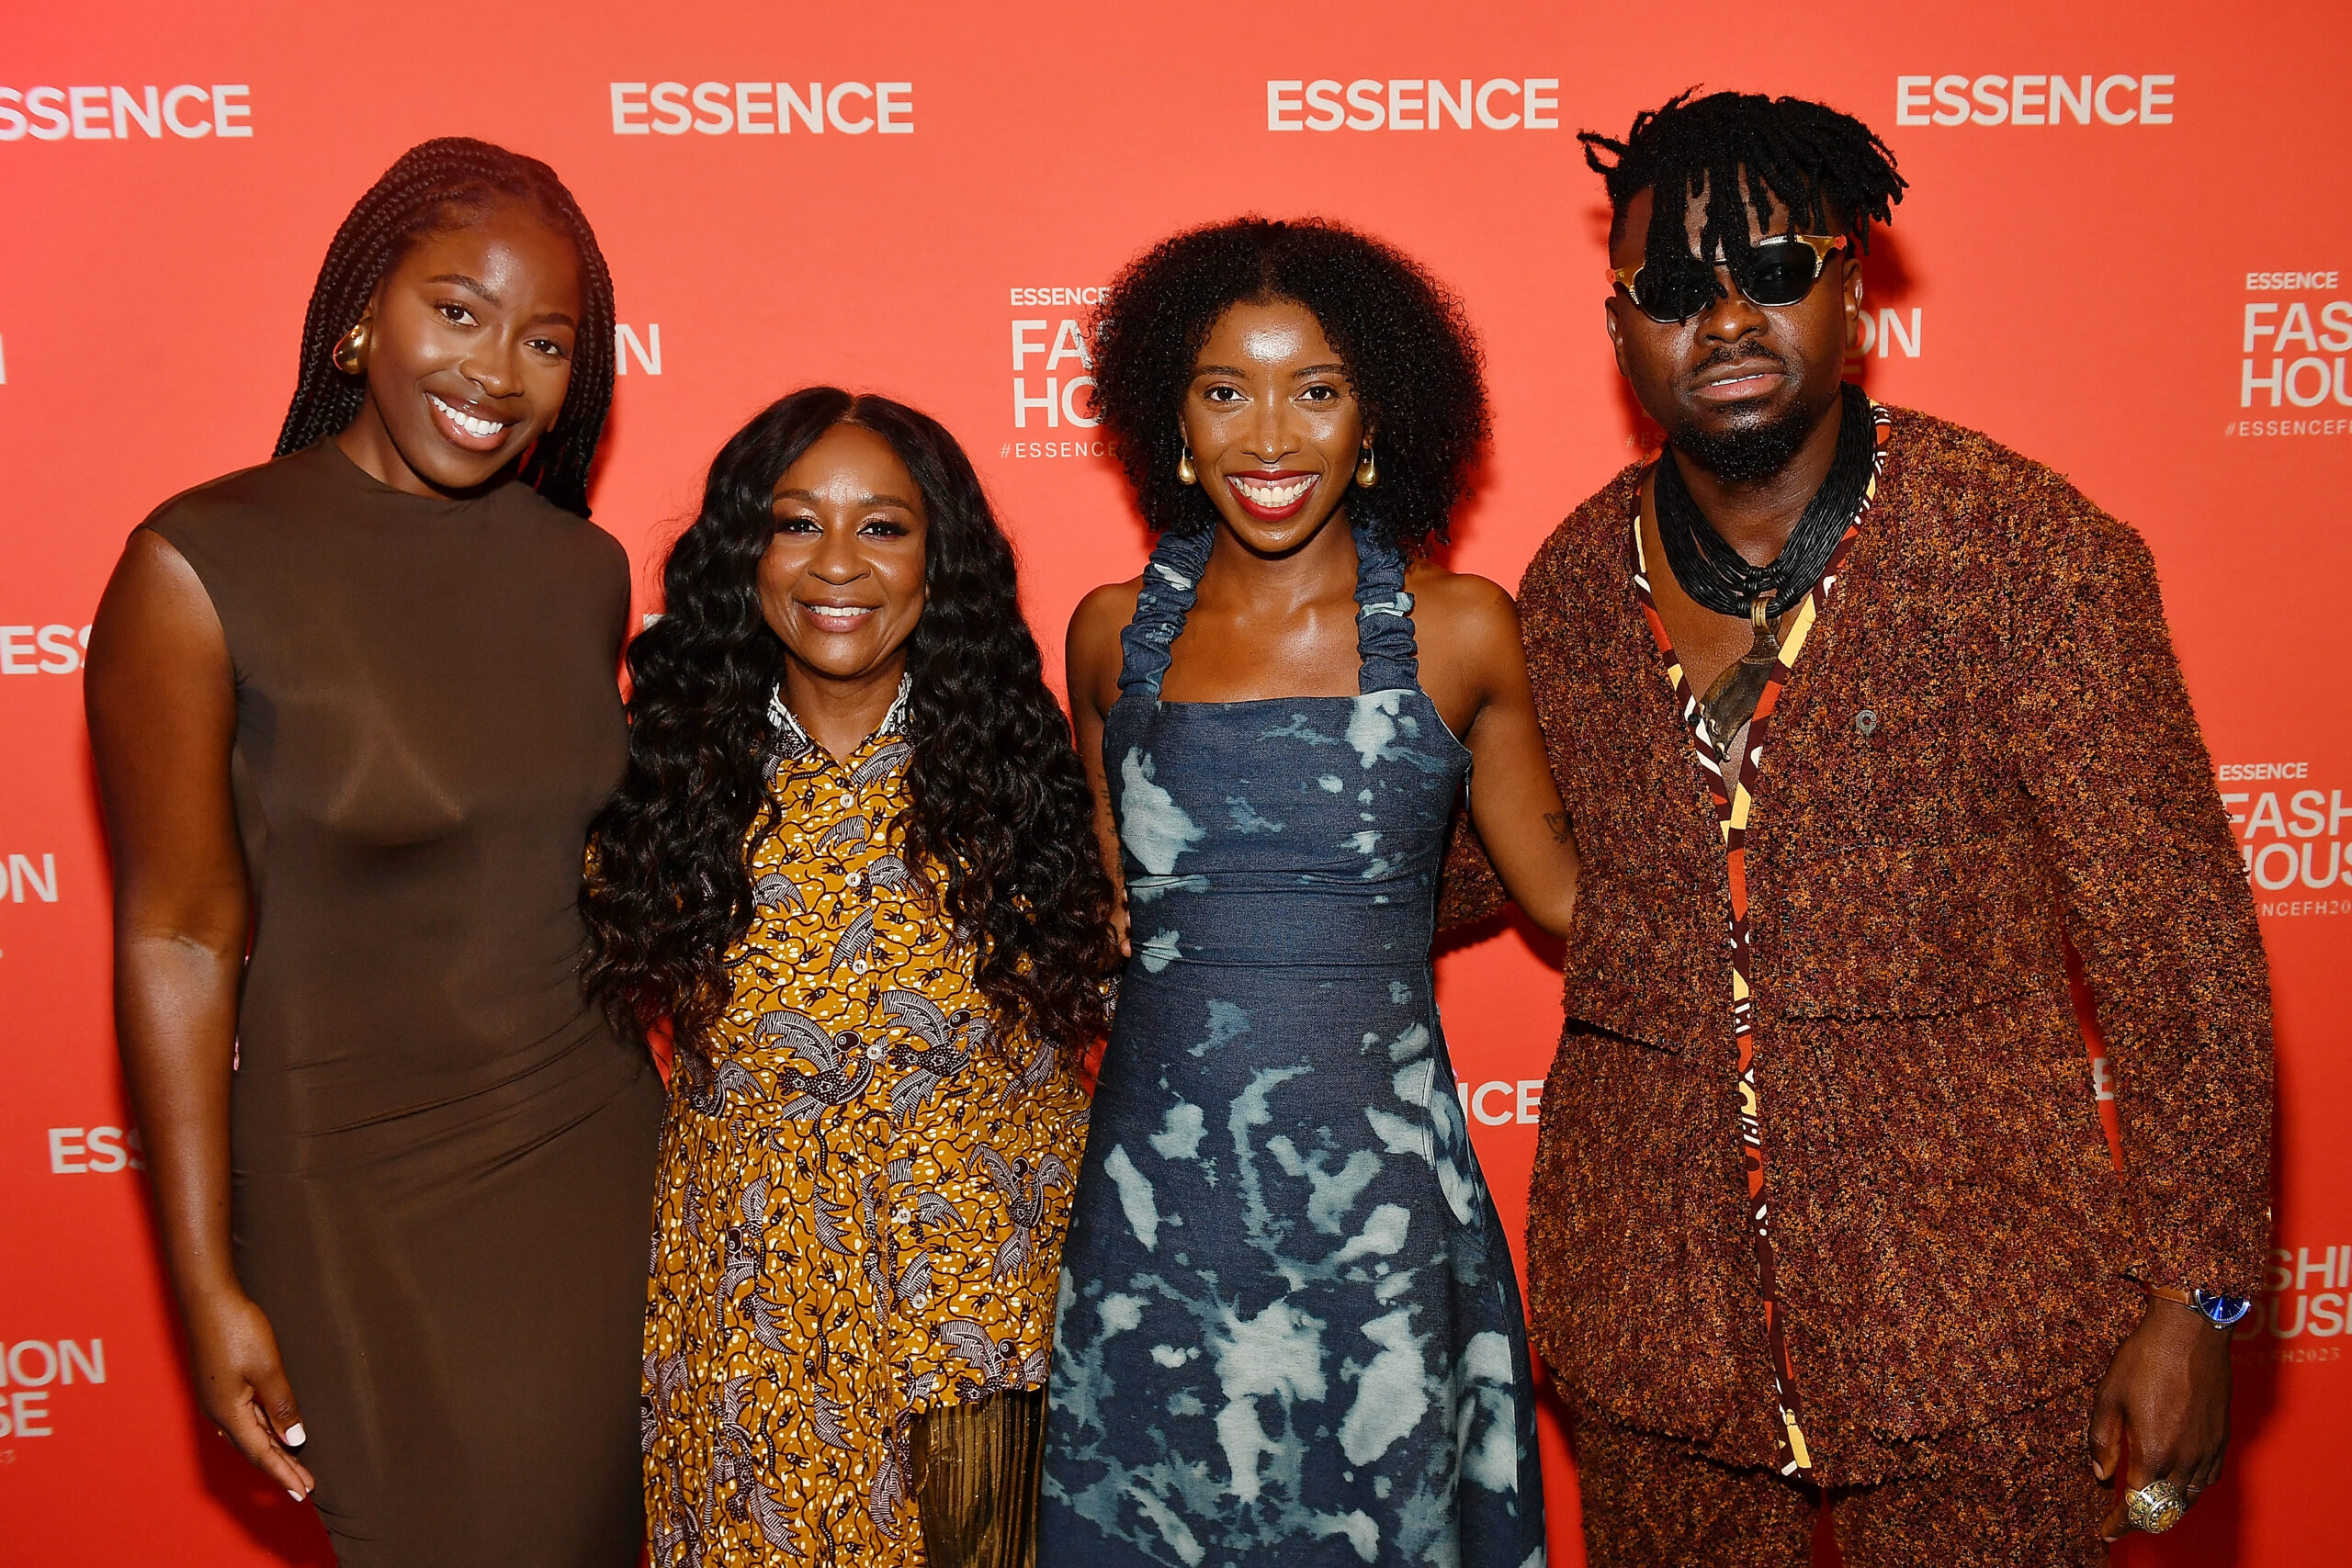 Here’s What You Missed At A Night Out At Essence Fashion House